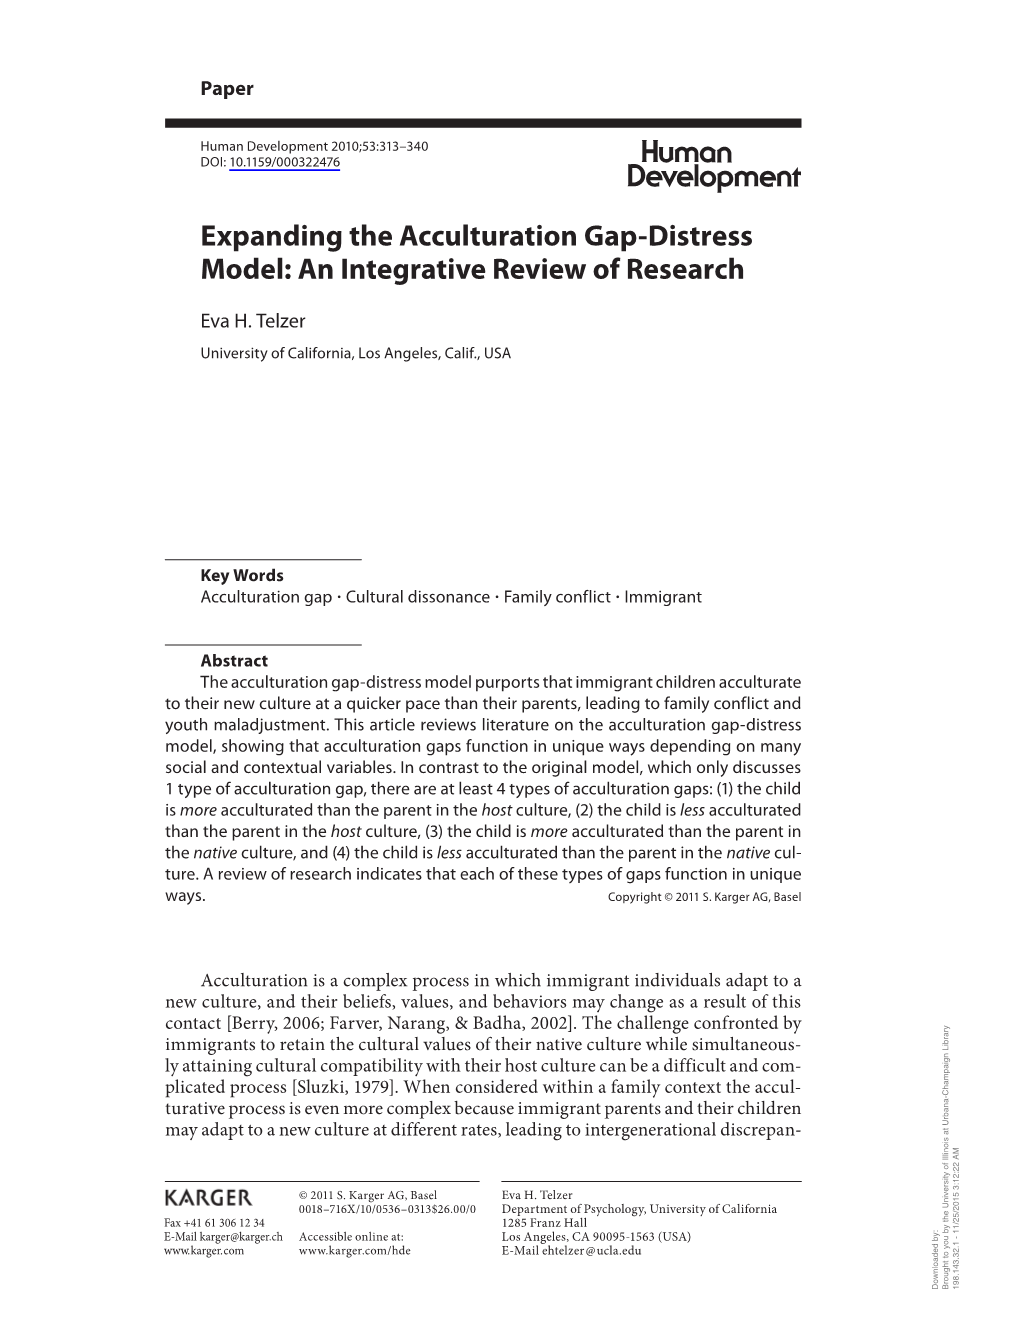 Expanding the Acculturation Gap-Distress Model: an Integrative Review of Research